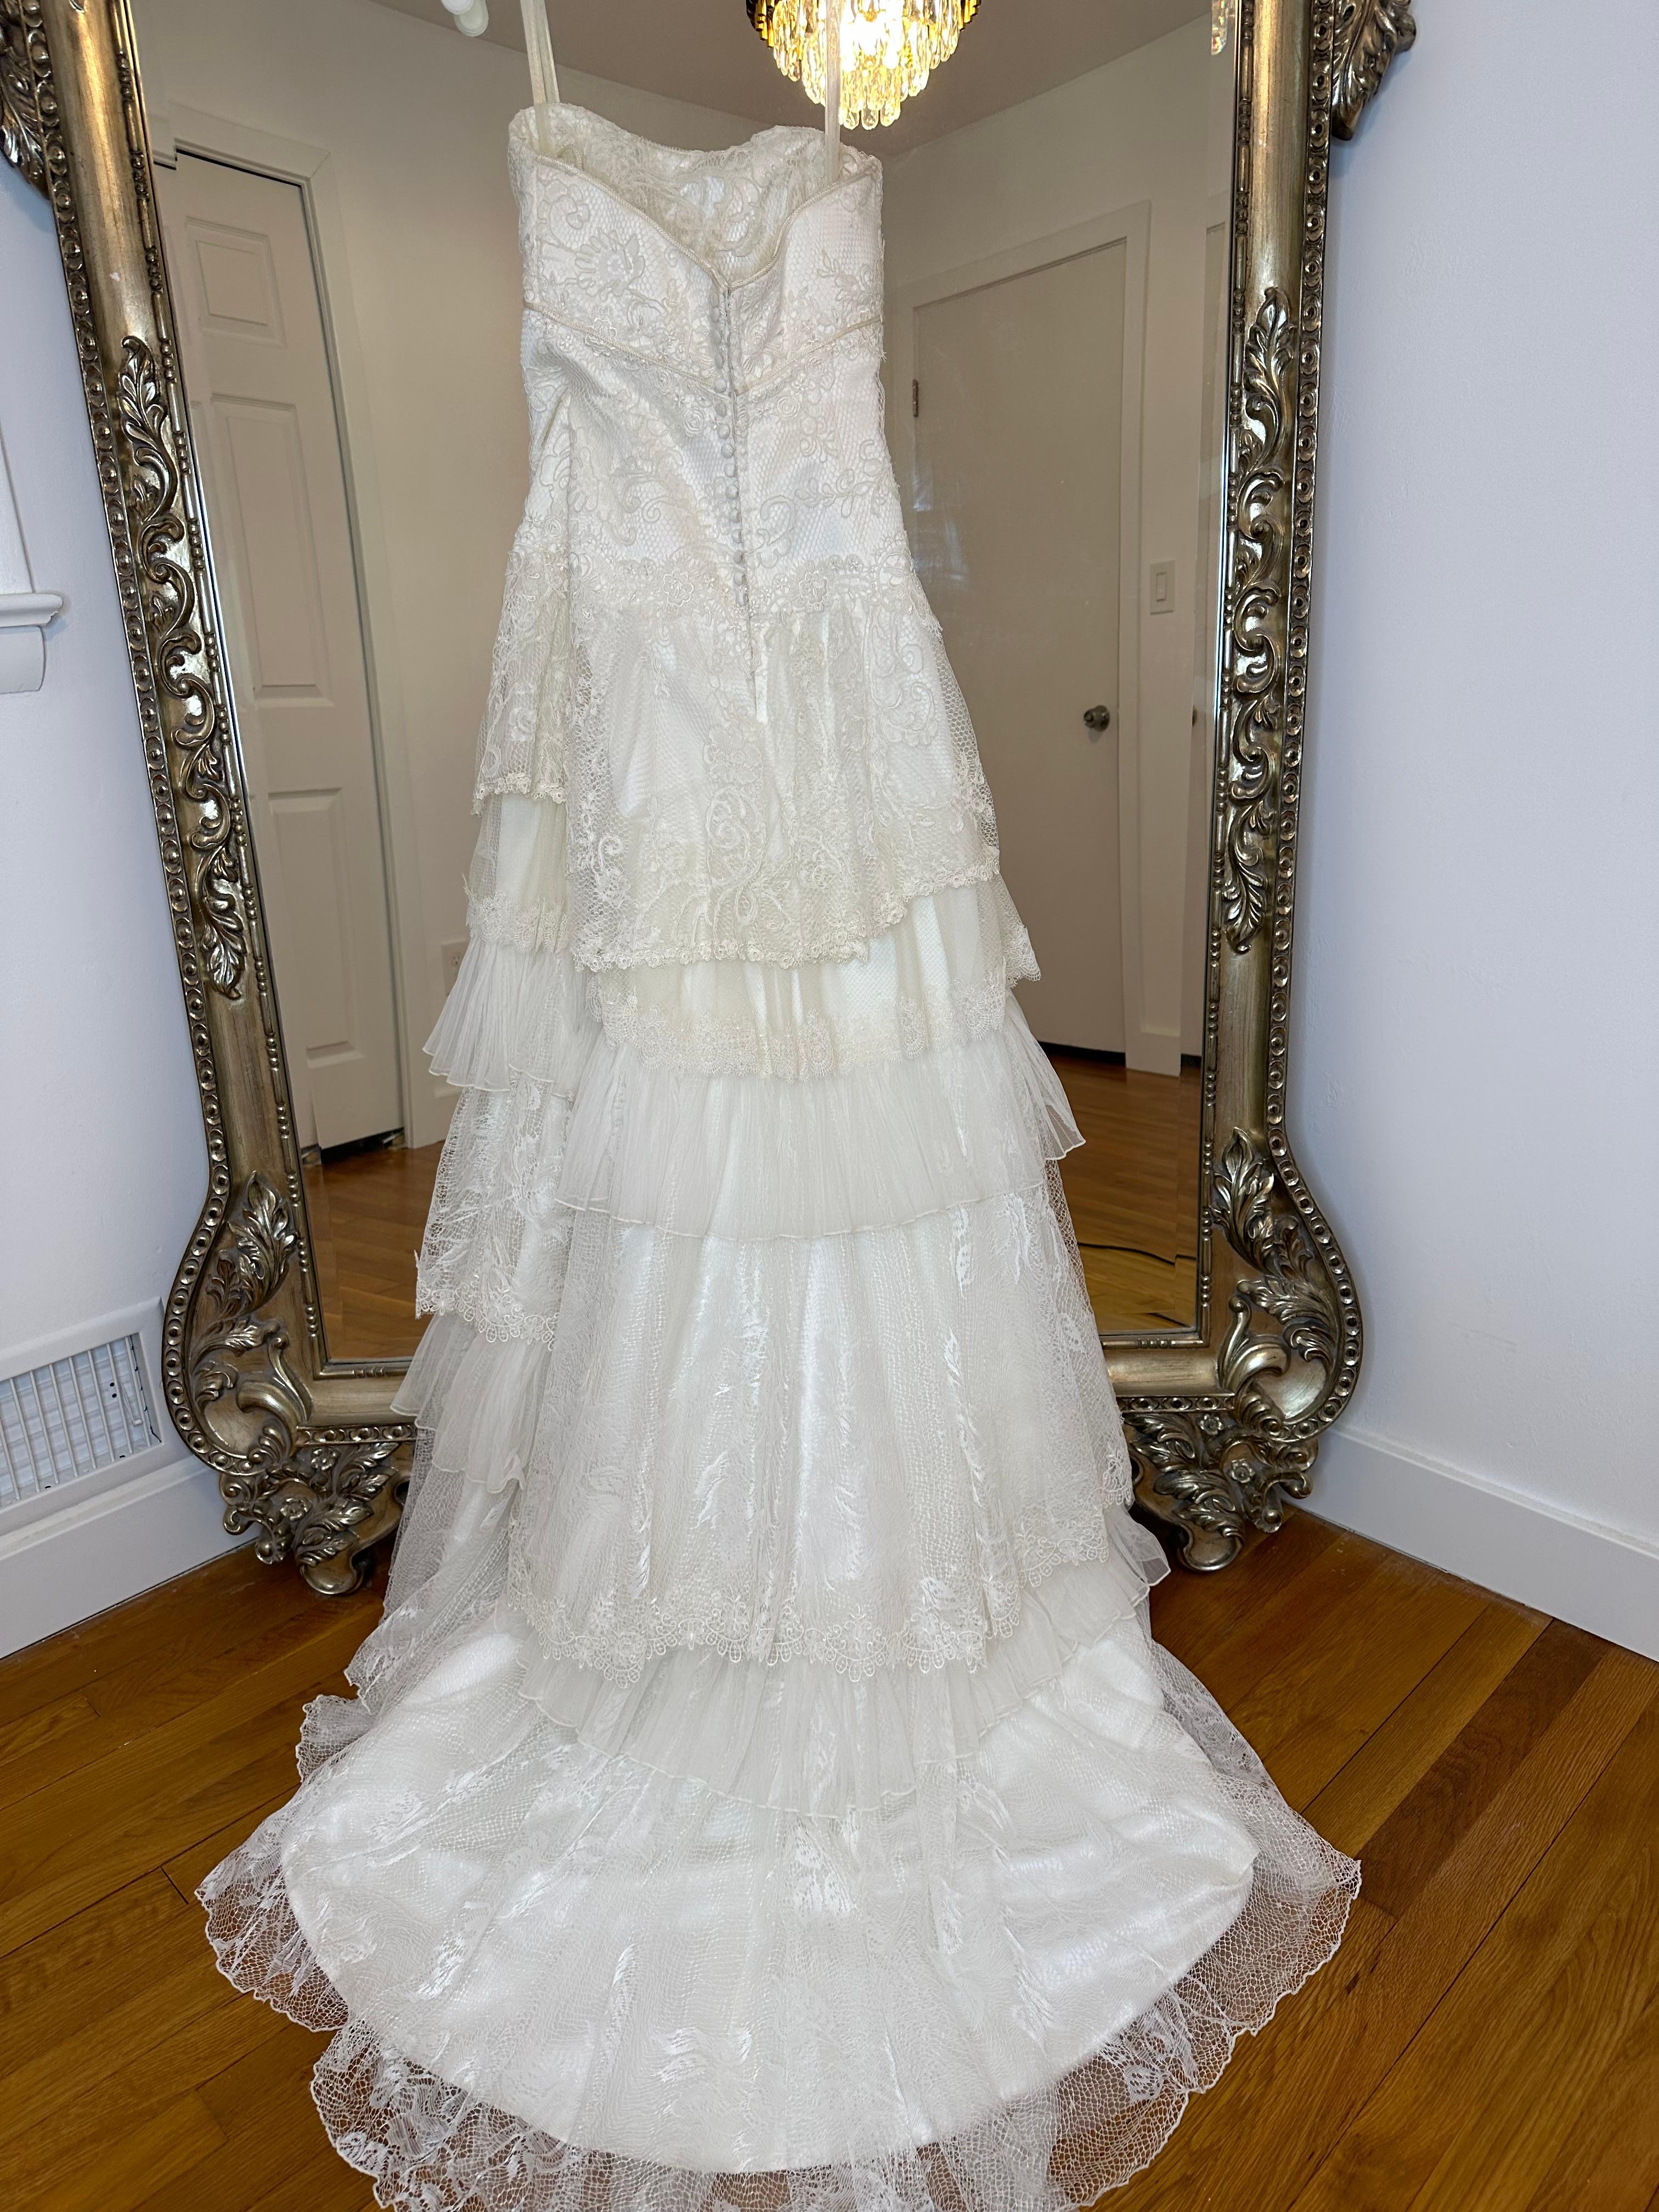 Vintage Dolce Gabbana 1990’s ivory wedding dress

Selling my wedding dress. It is absolutely gorgeous. I spent months looking for a dress and this one was by far the winner. I’m moving overseas and that’s the reason I’m considering parting with it.